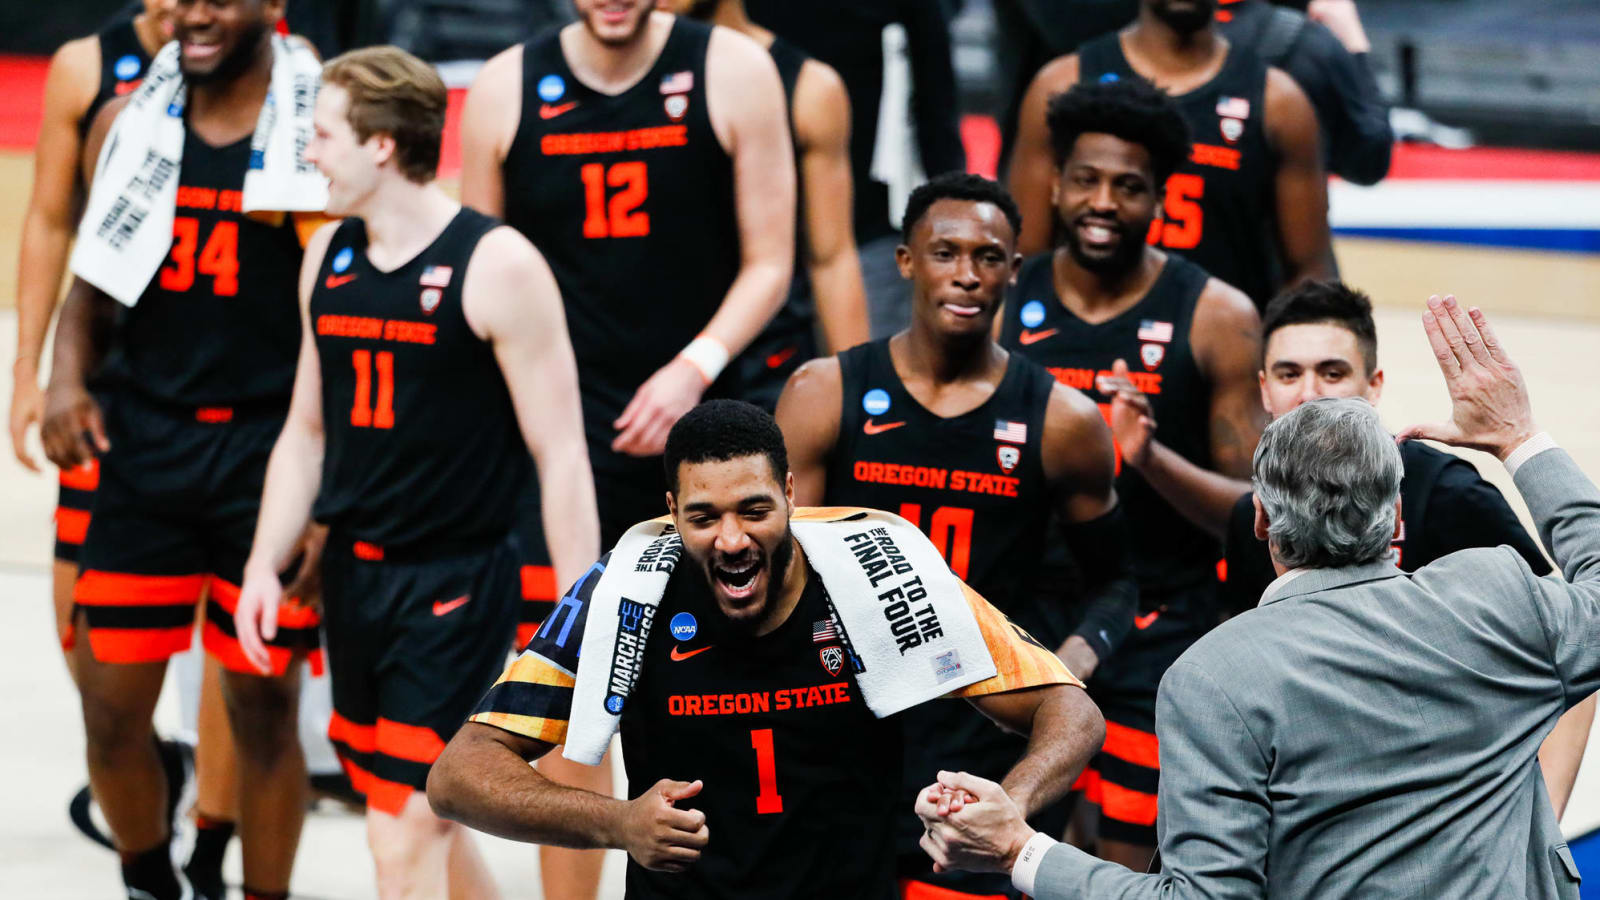 After upset win, Oregon State trolls Tennessee with Monopoly post 